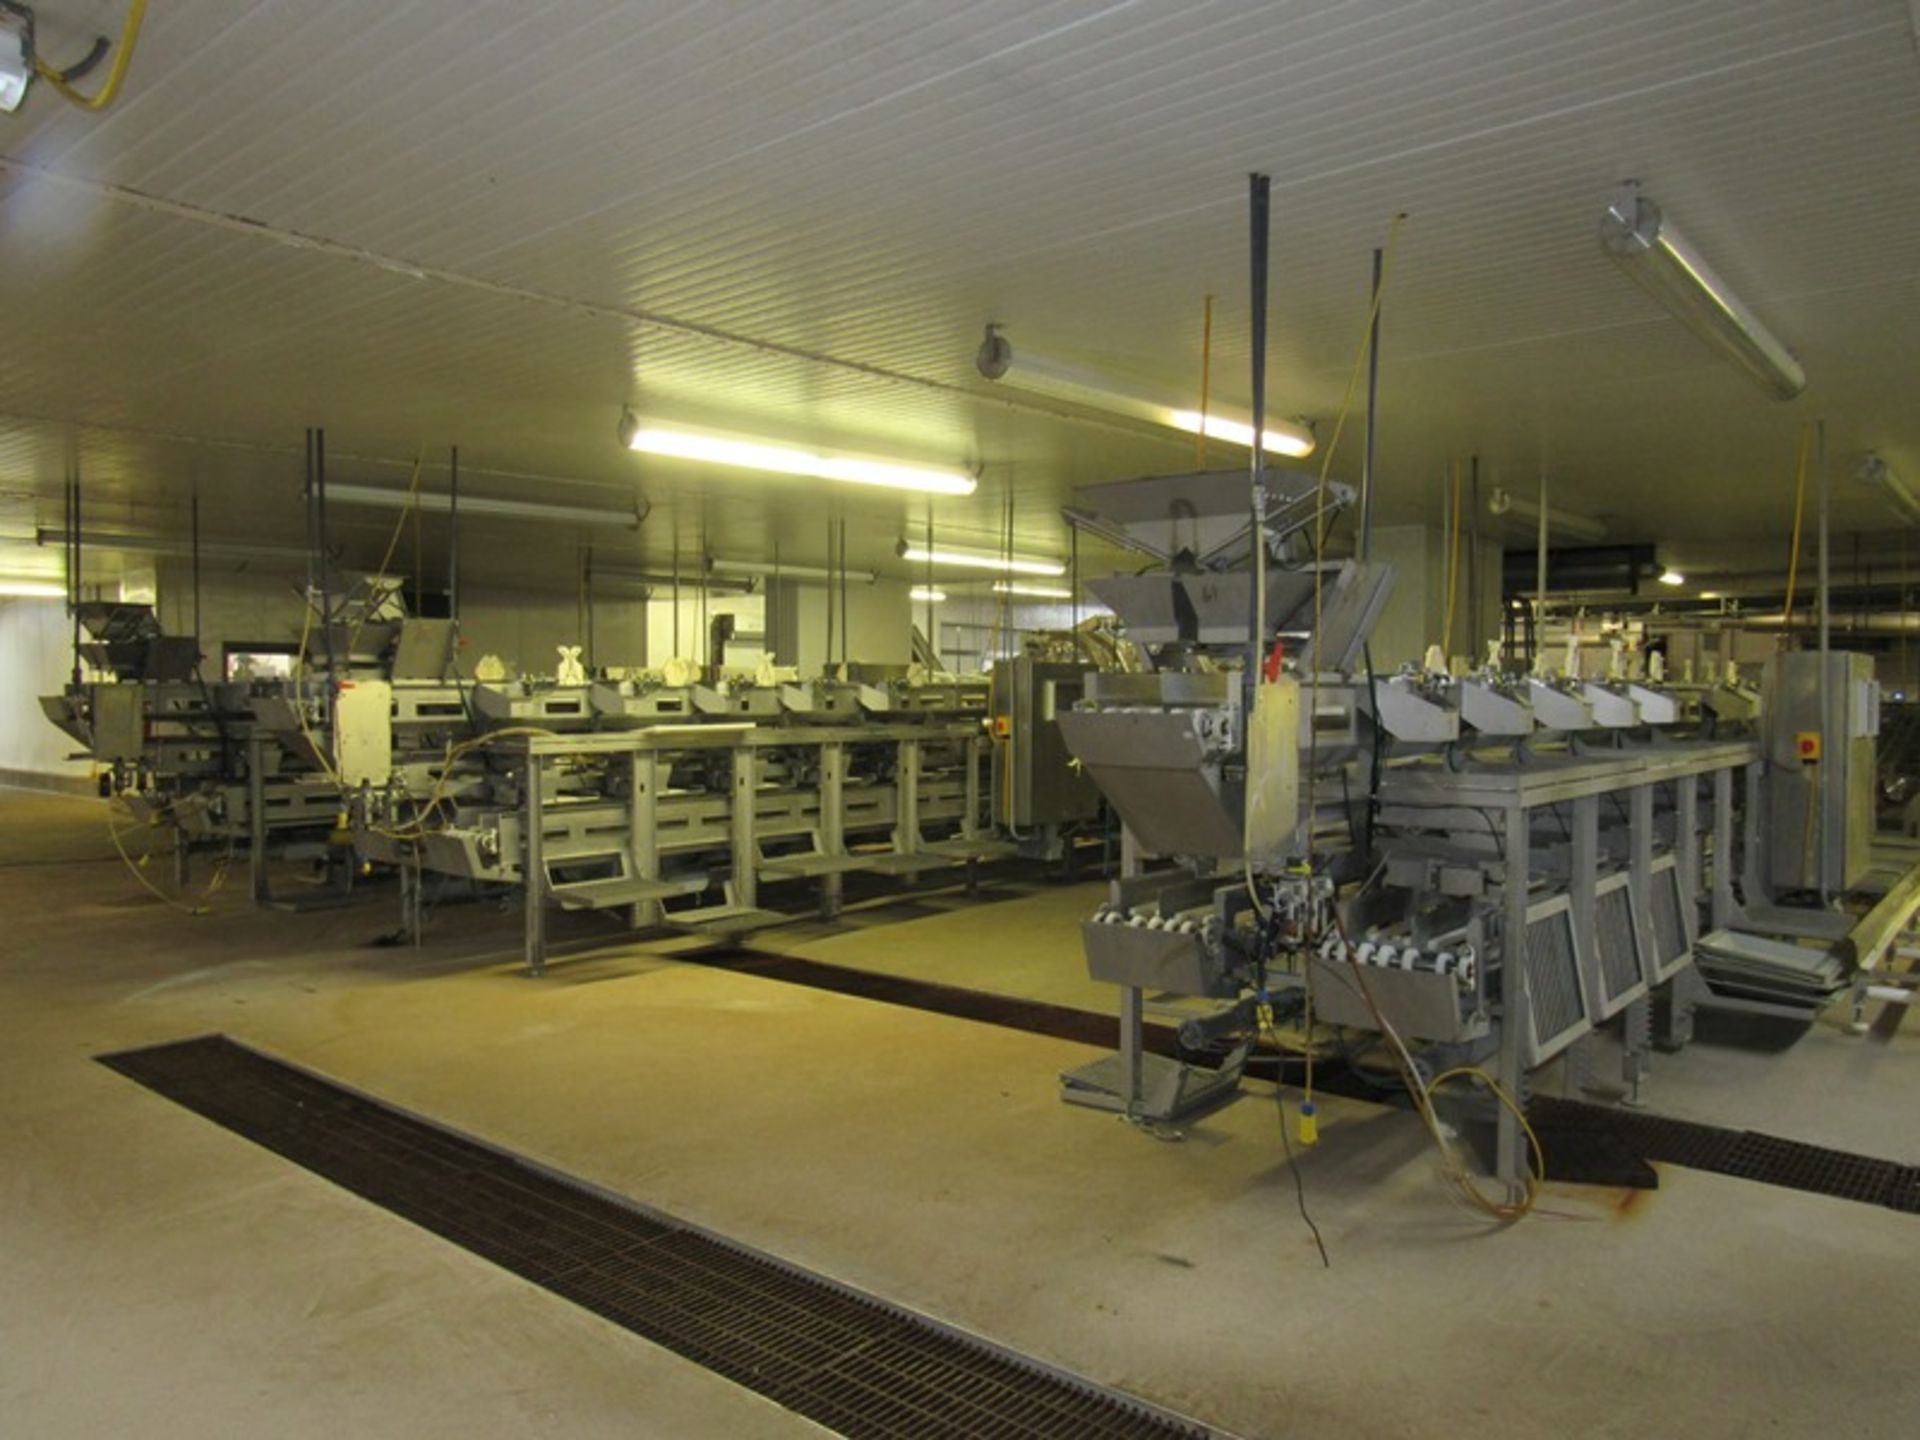 C.A.T. Stainless Steel Grading Line, dual lanes, 10 positions per lane, pneumatic drop chutes, - Image 3 of 18